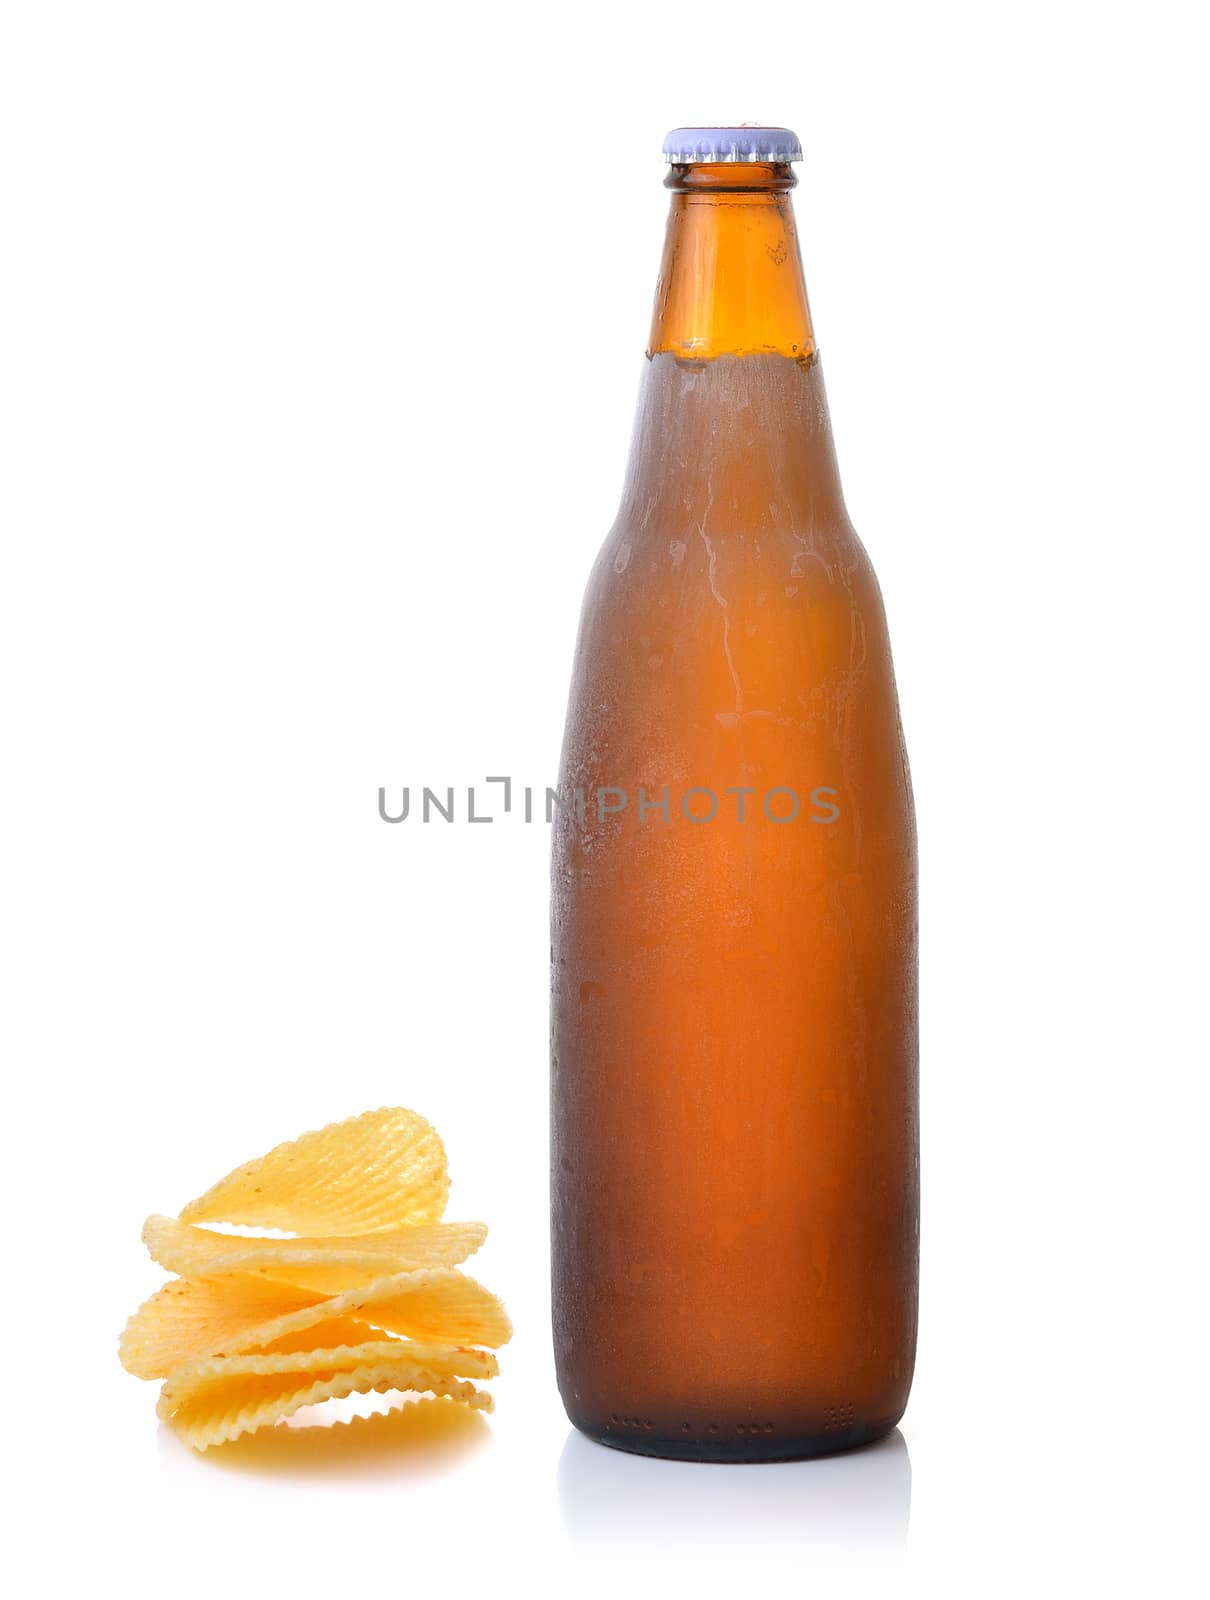 potatoes and beer on white background